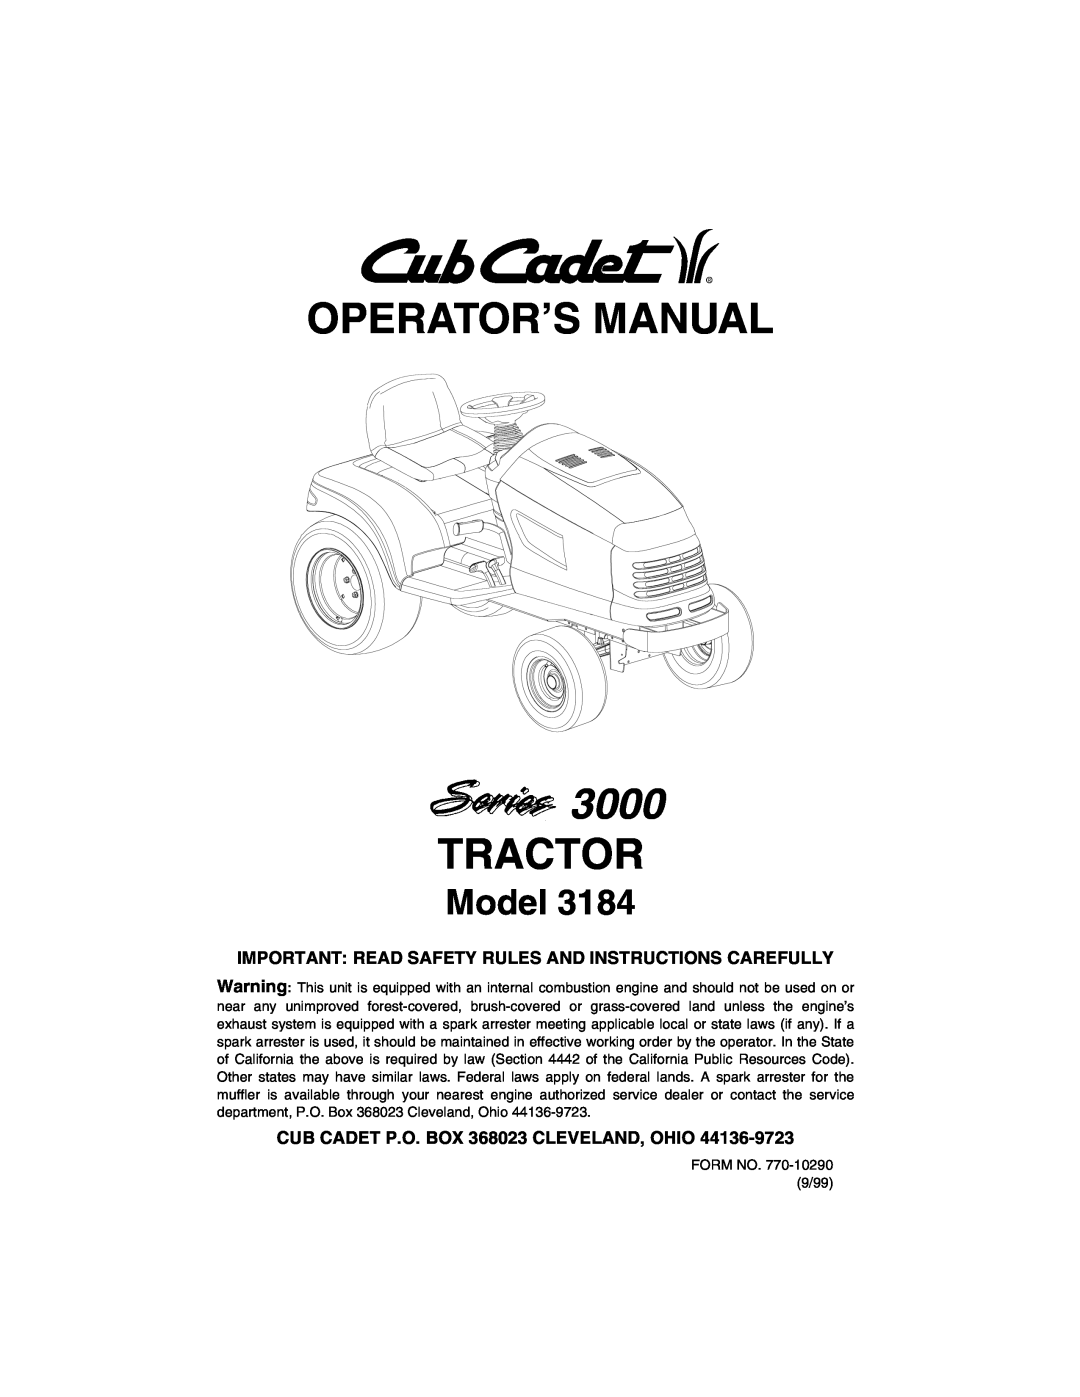 Cub Cadet 3184 manual Operator’S Manual, 3000, Tractor, Model, Important Read Safety Rules And Instructions Carefully 